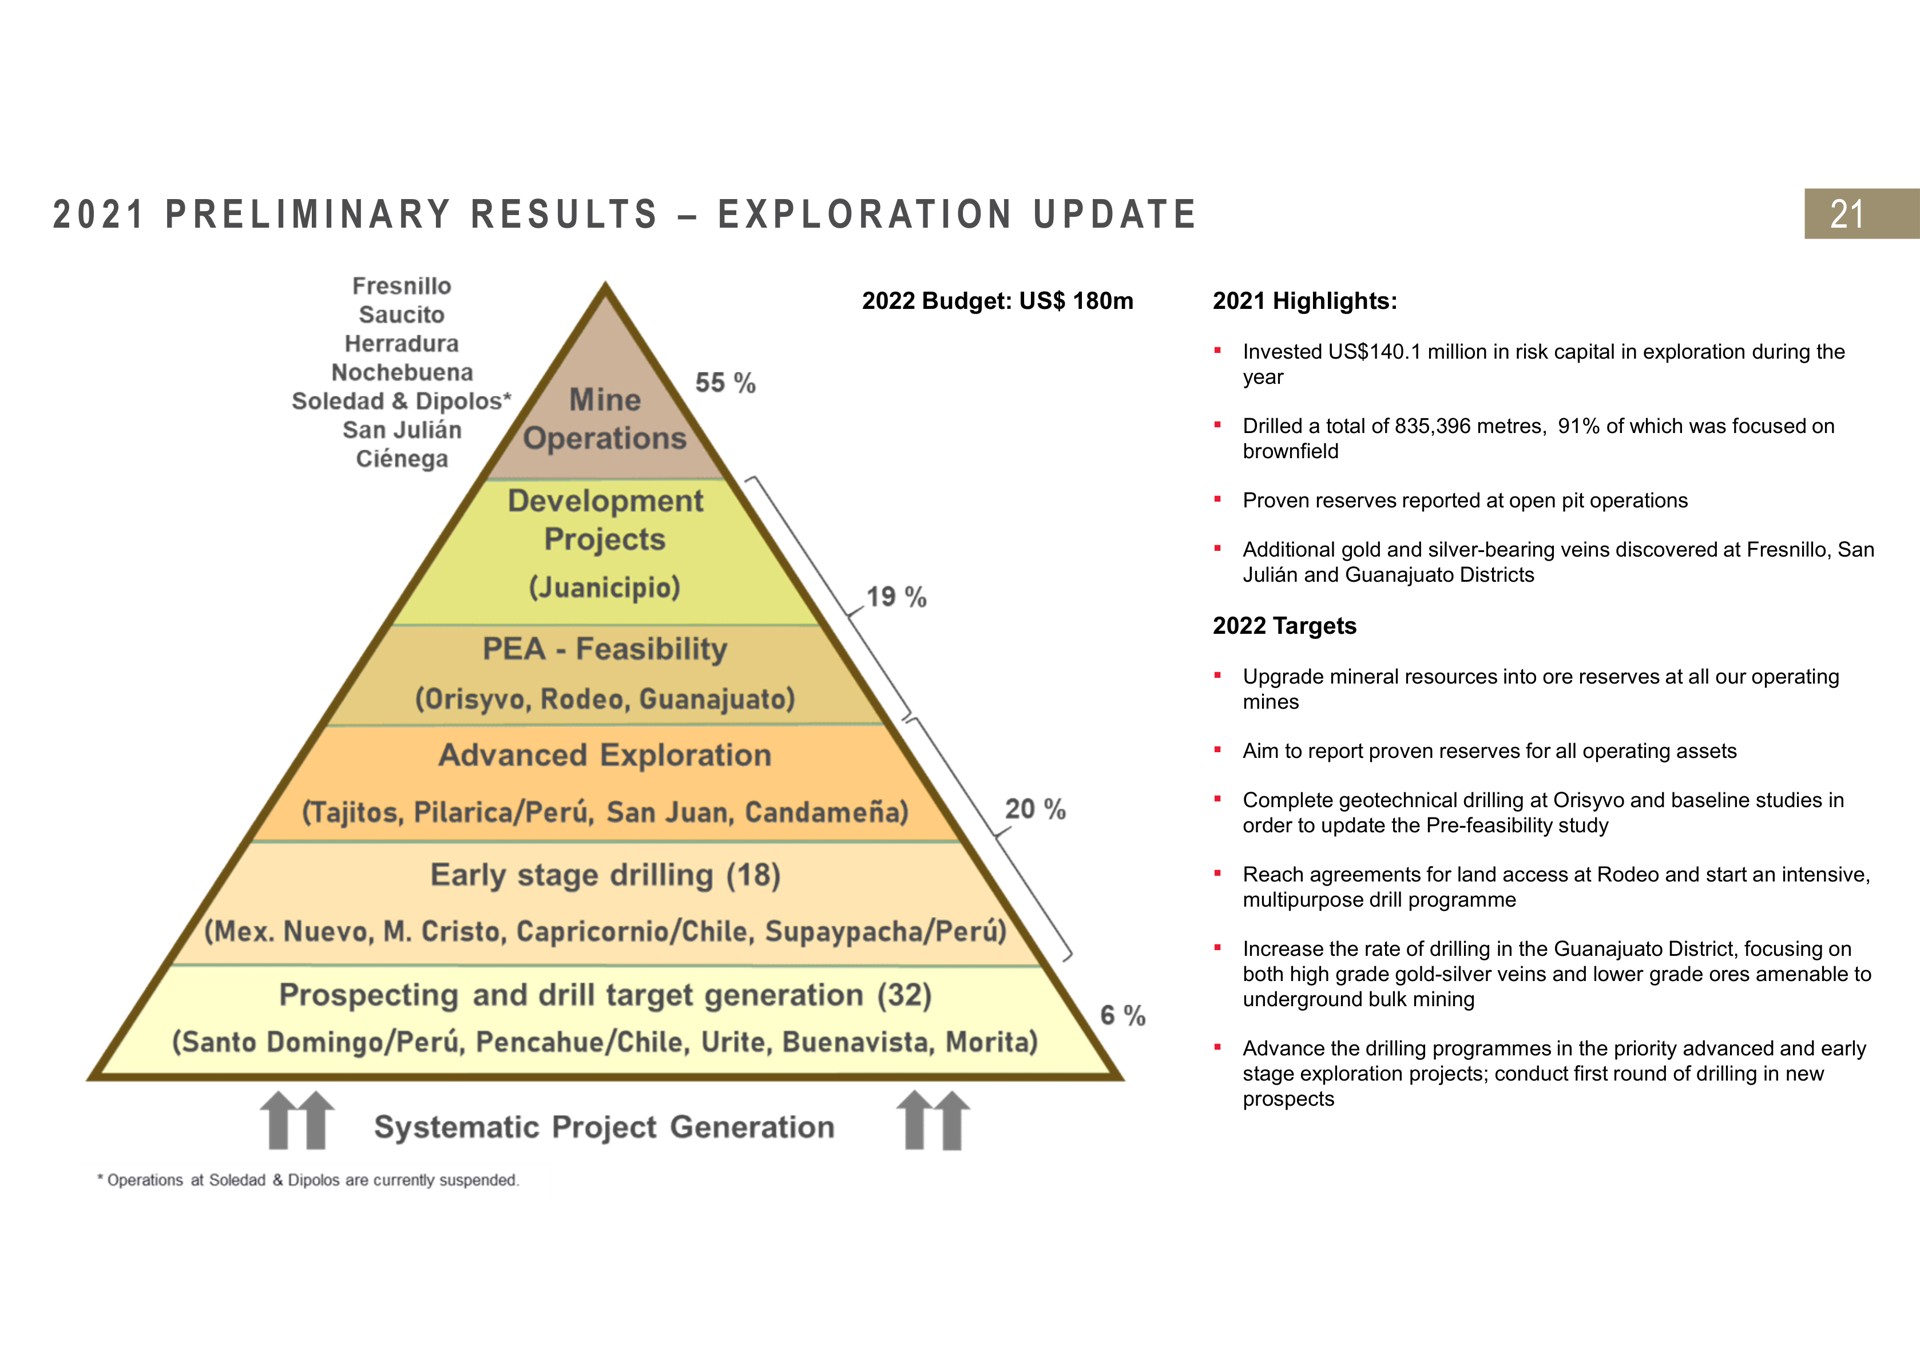 i i a at i at preliminary results exploration update projects advanced exploration early stage drilling prospecting and drill target generation it | Fresnillo